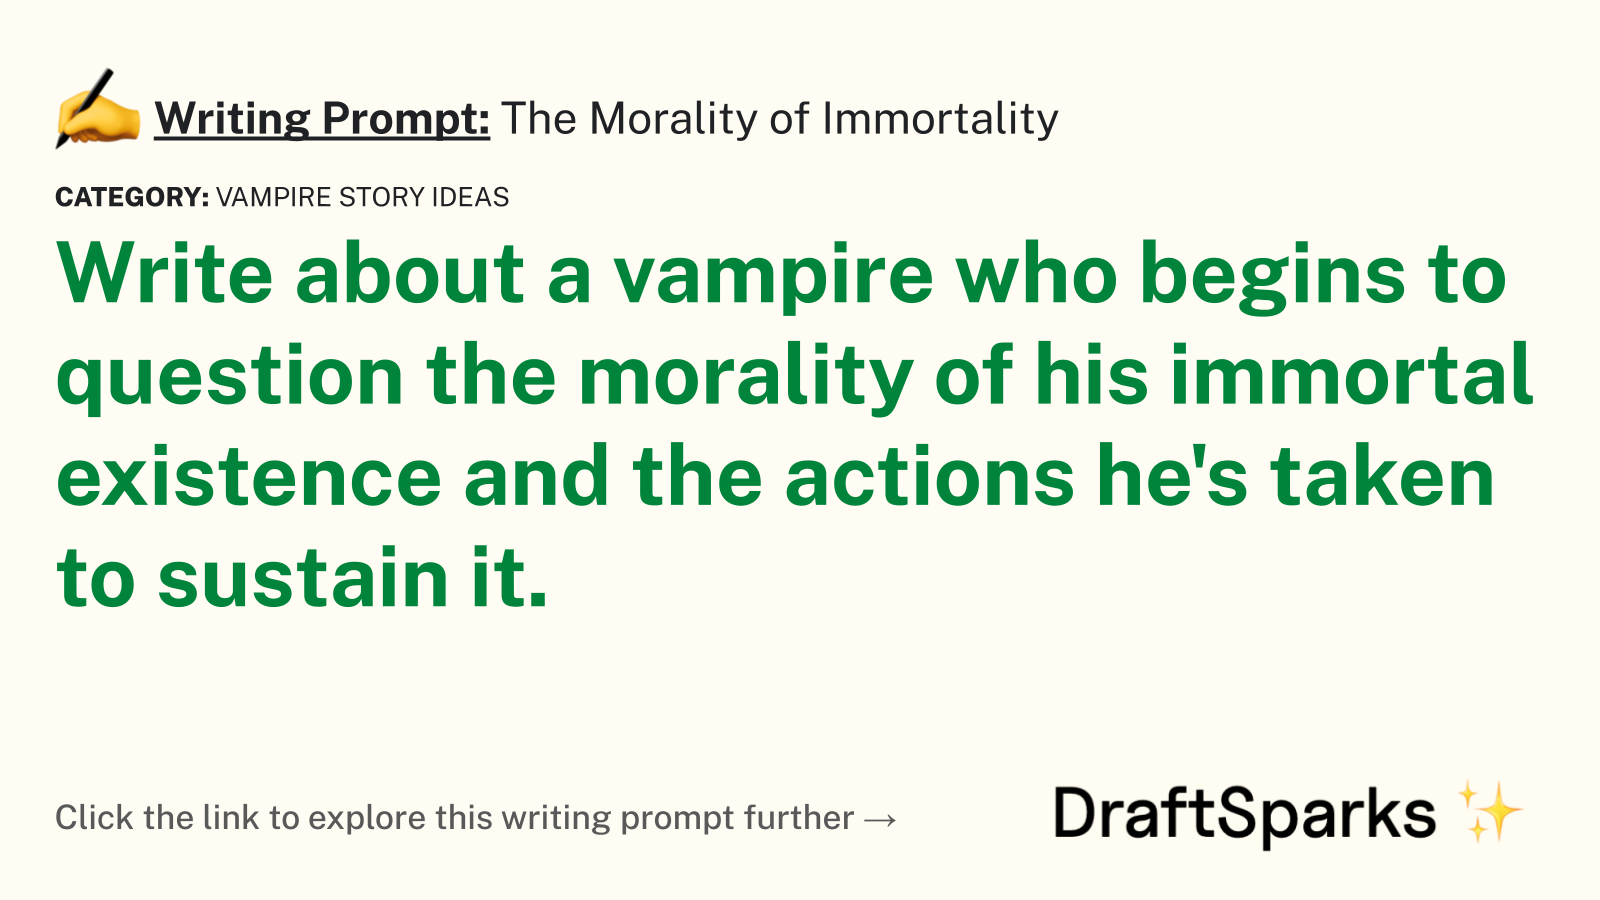 The Morality of Immortality